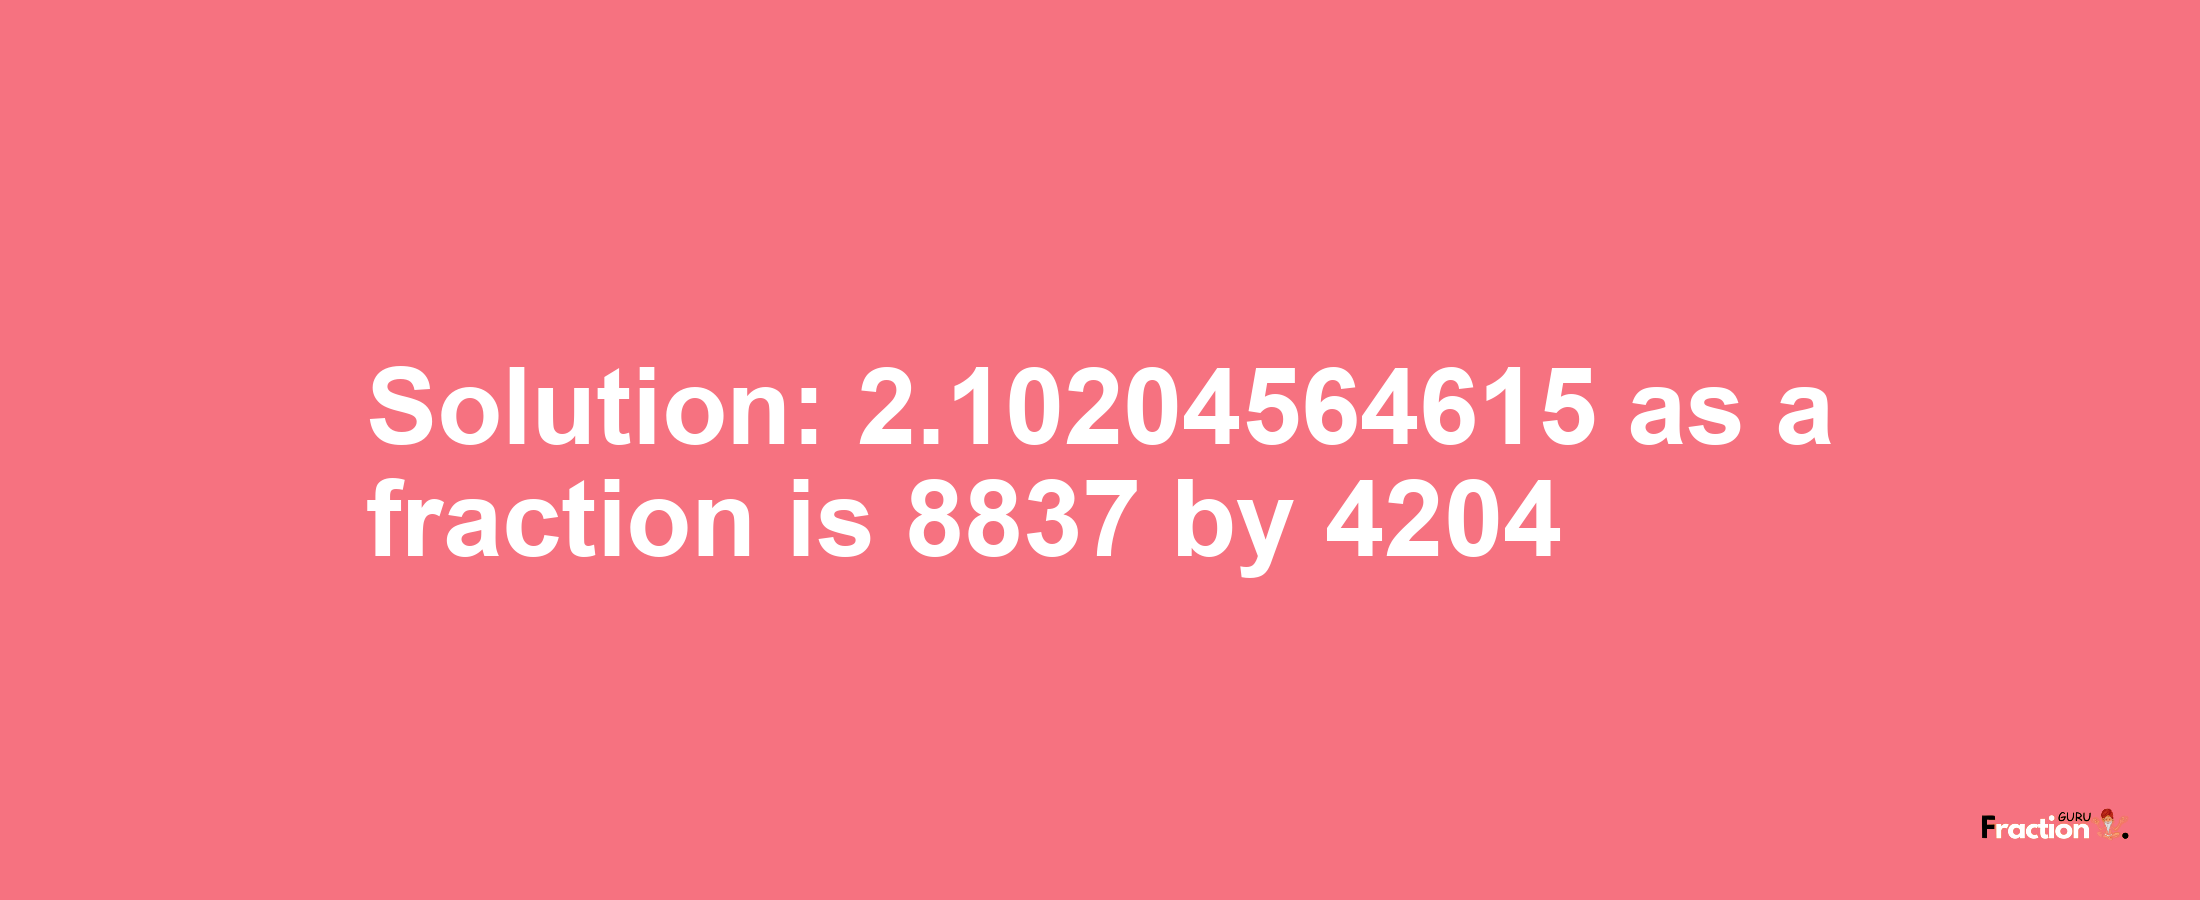 Solution:2.10204564615 as a fraction is 8837/4204